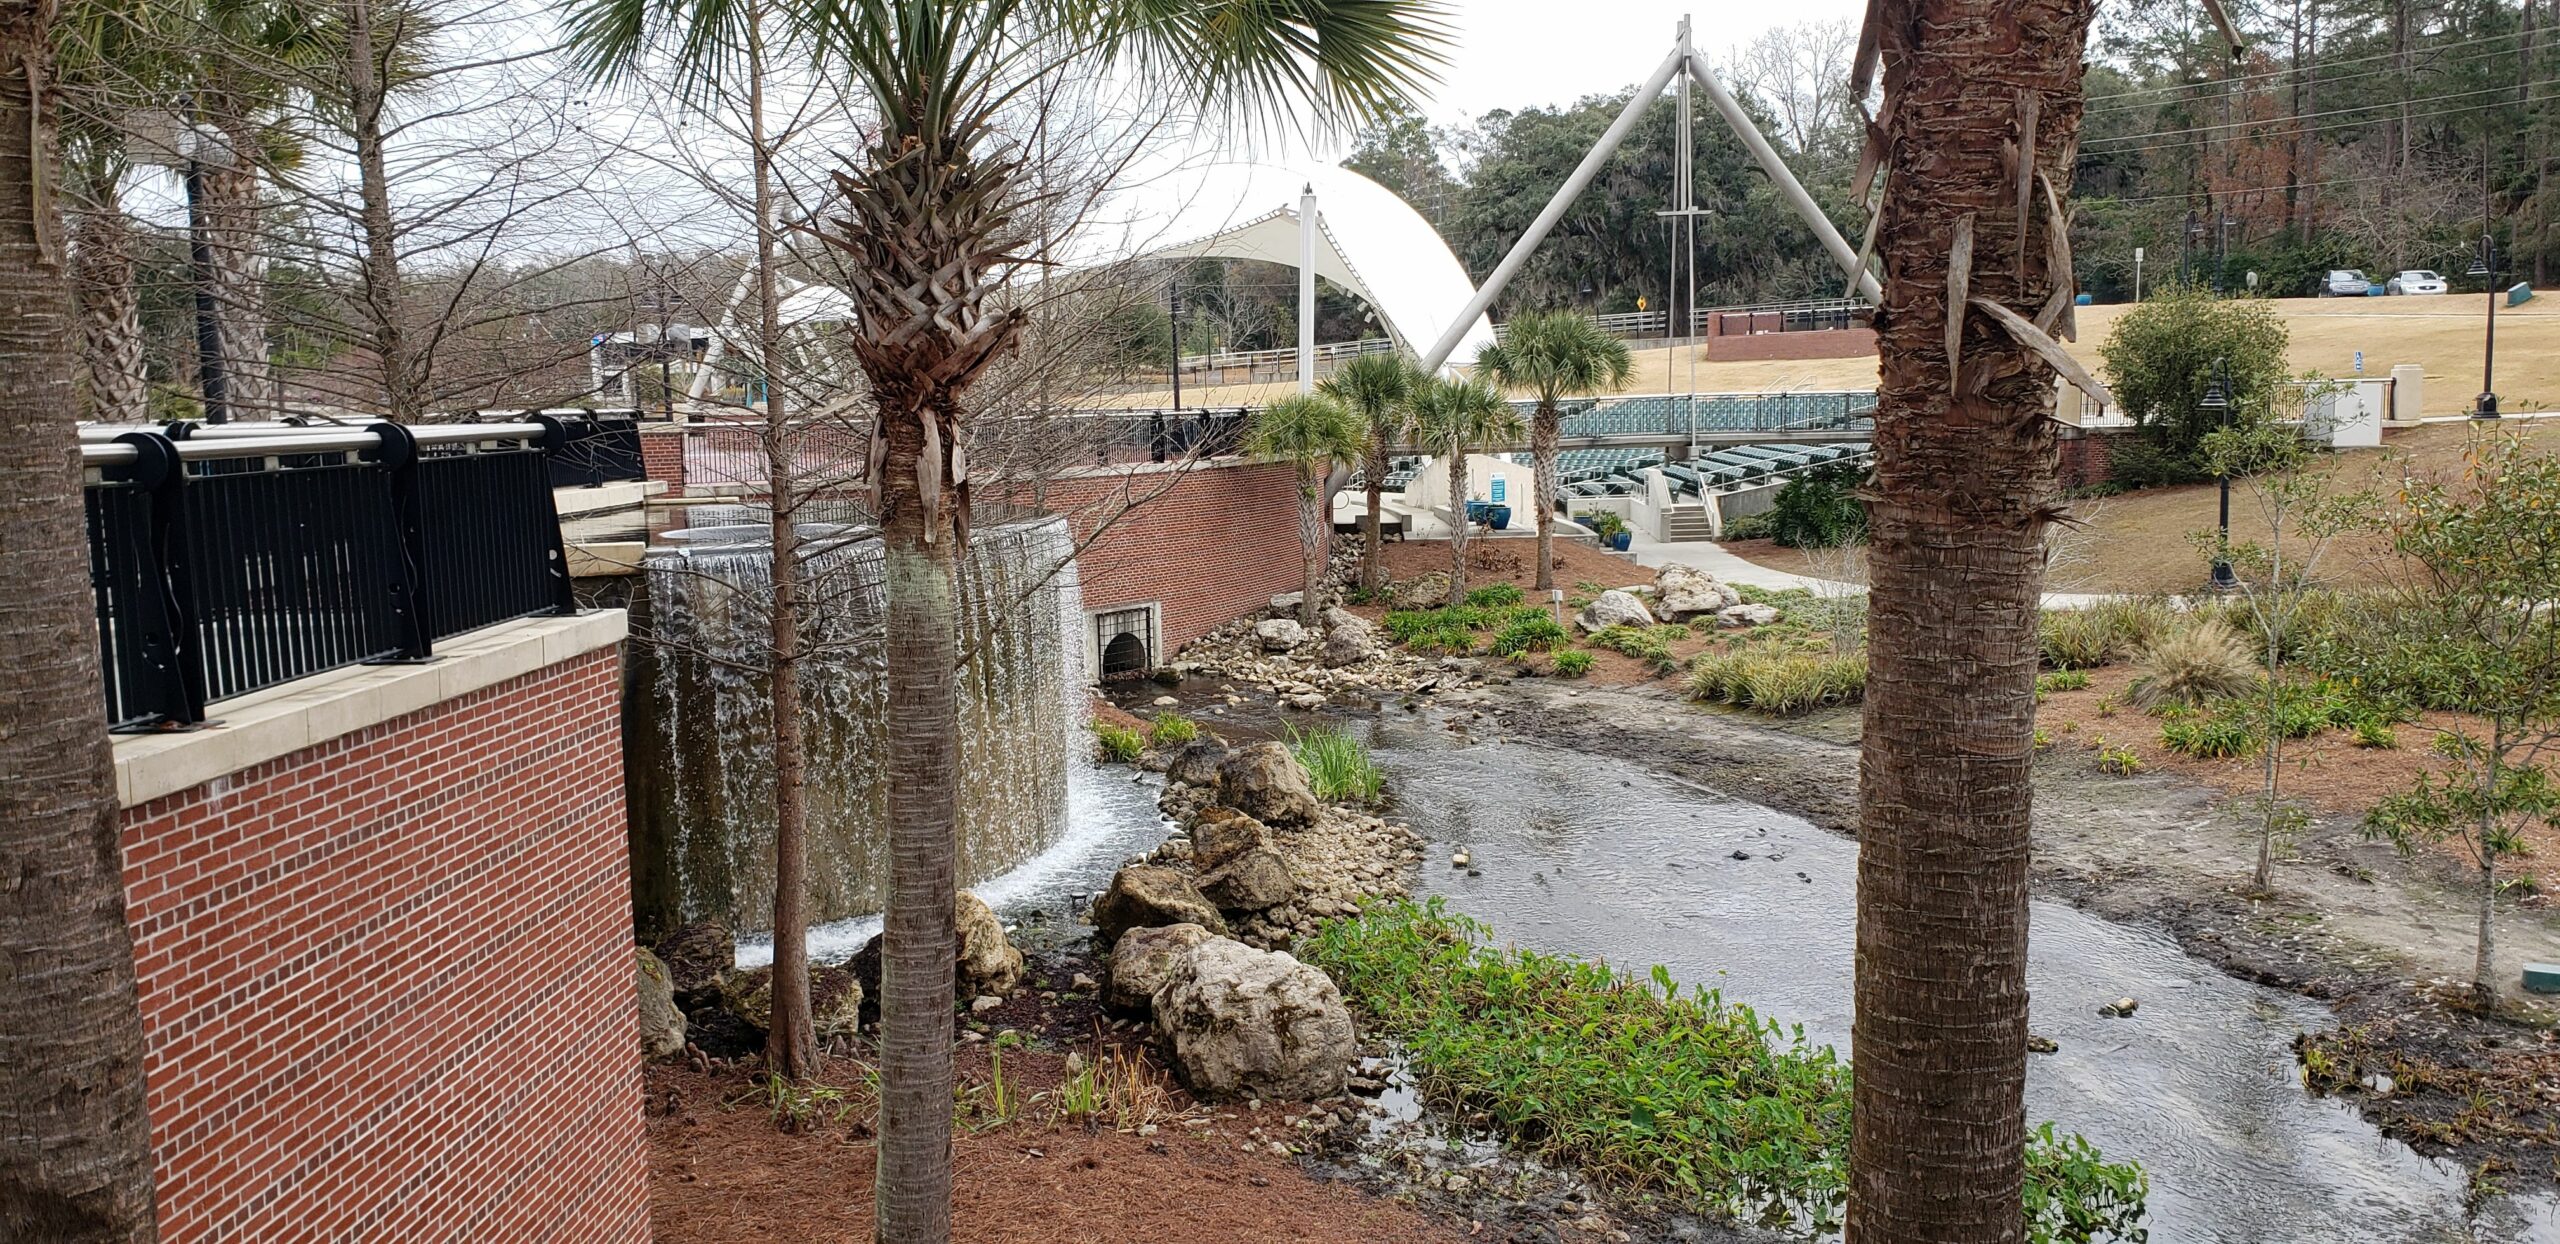 Cascades Park in Tallahassee